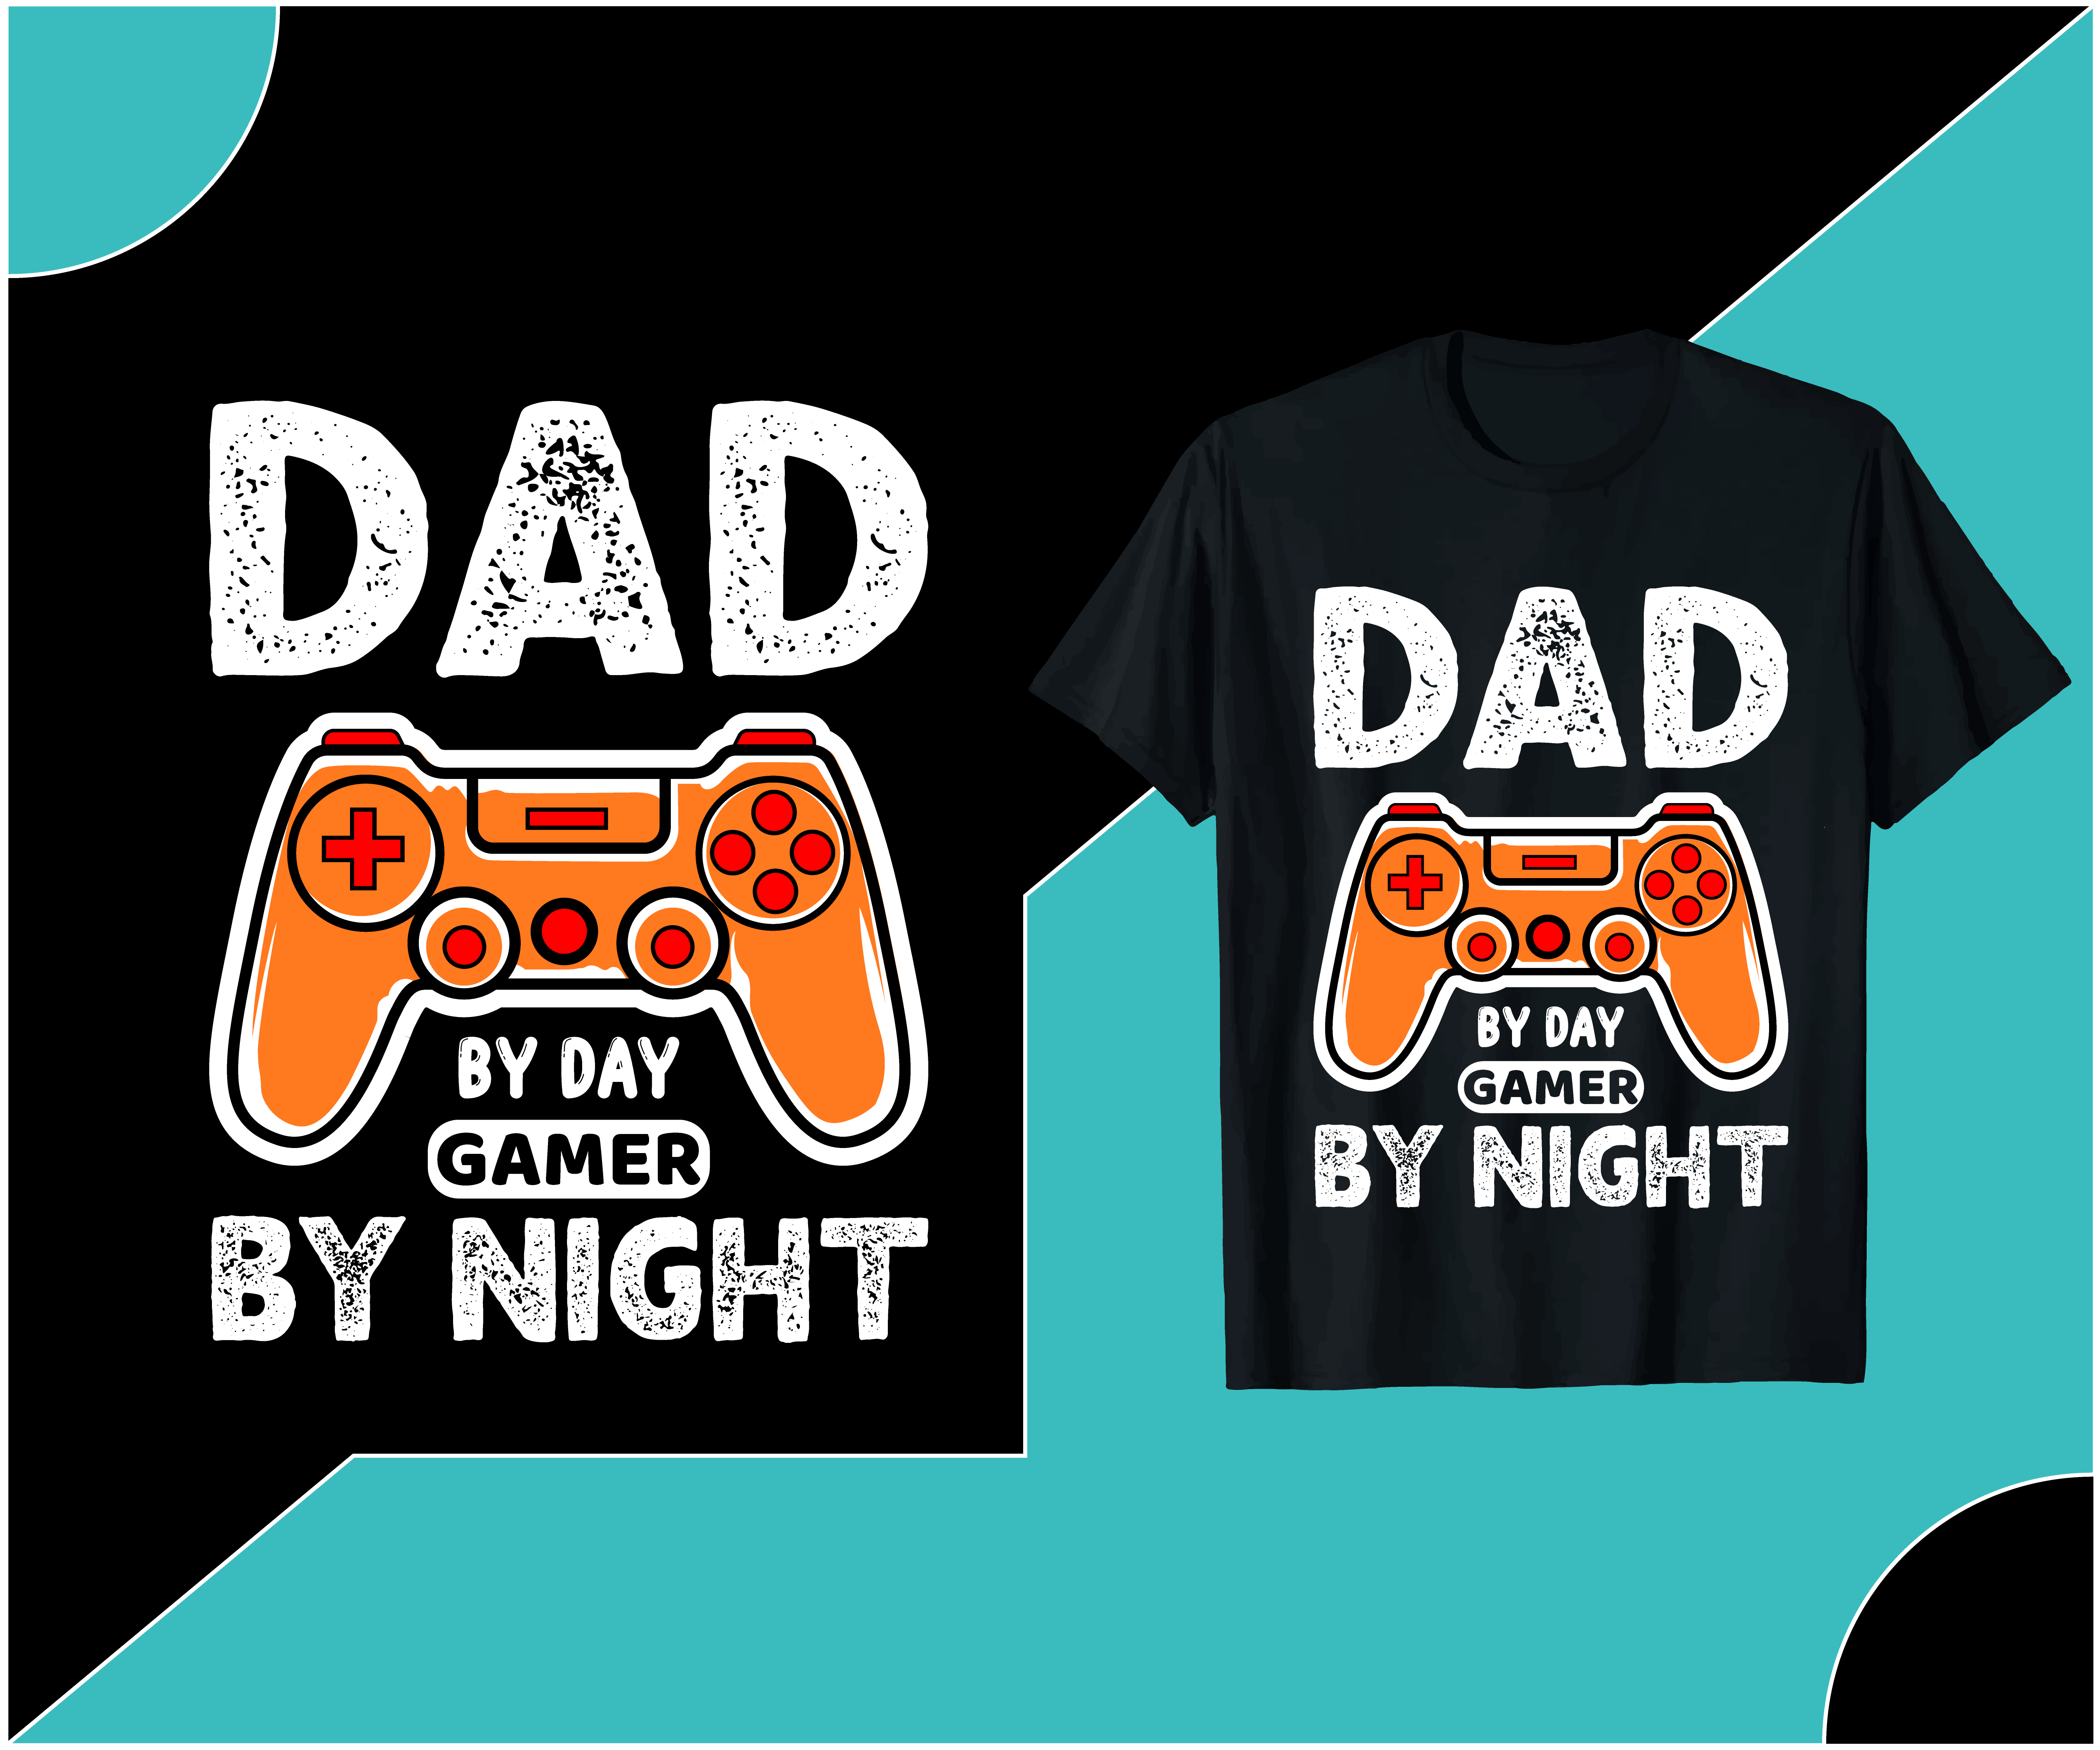 dad by day gamer by night converted 806